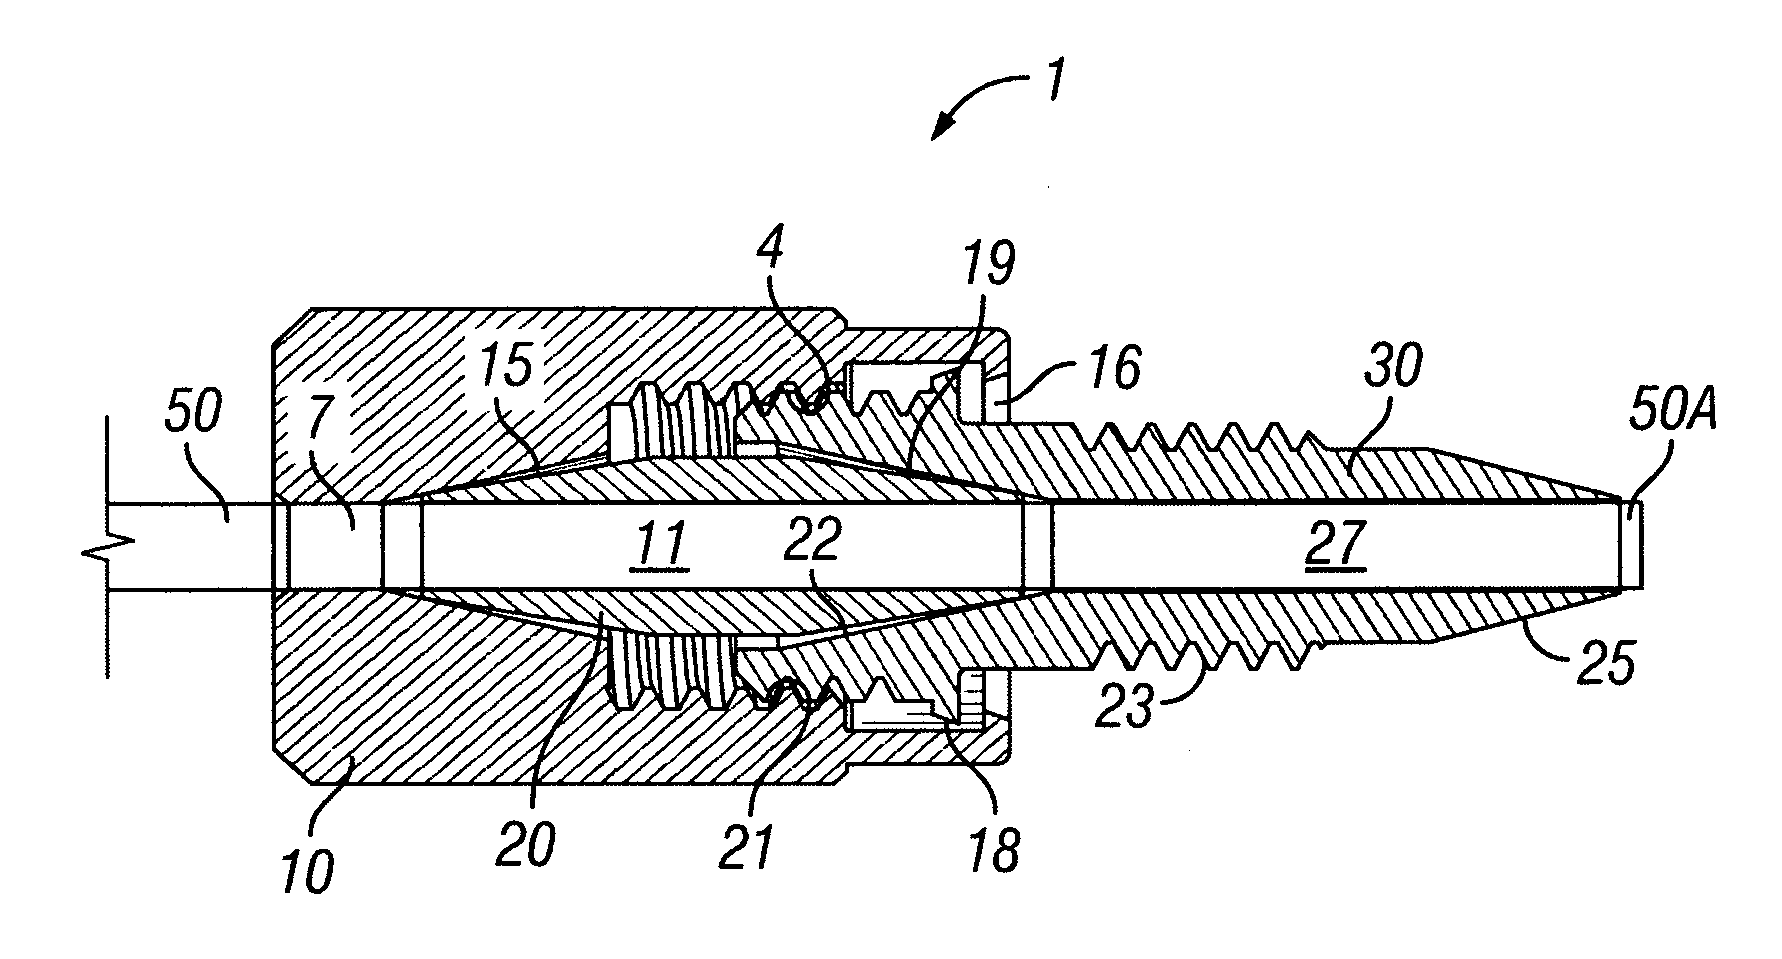 Connection assembly for ultra high pressure liquid chromatography